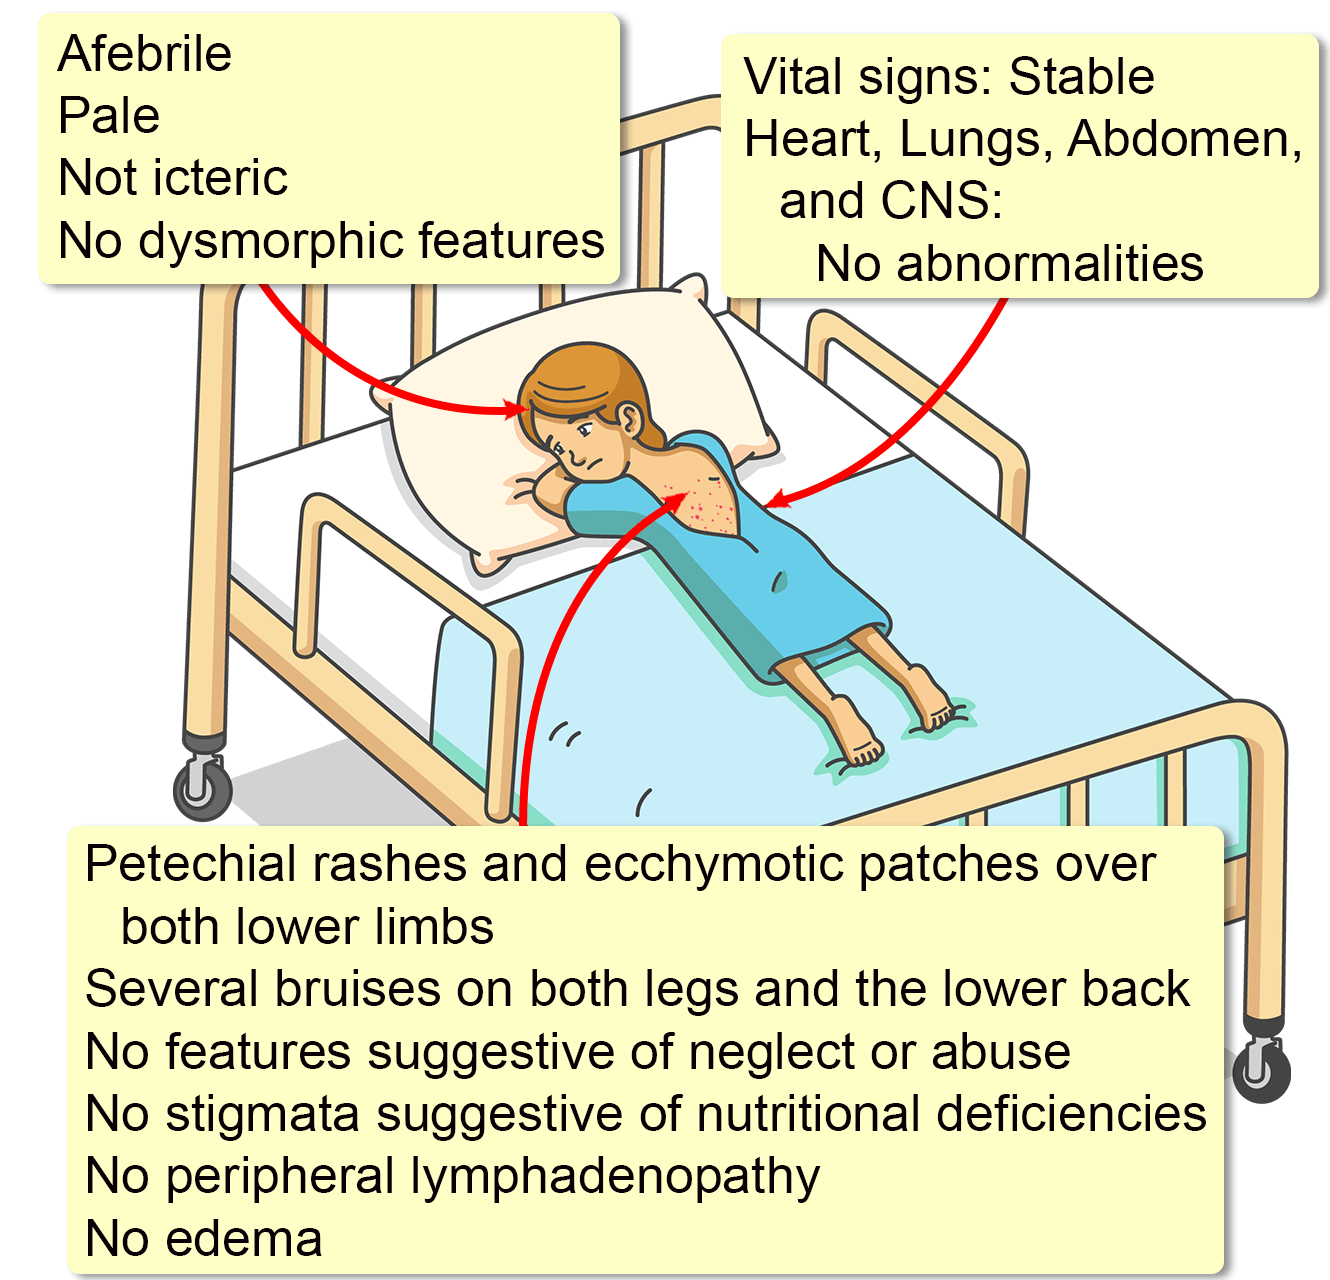 Aplastic Anemia Signs And Symptoms